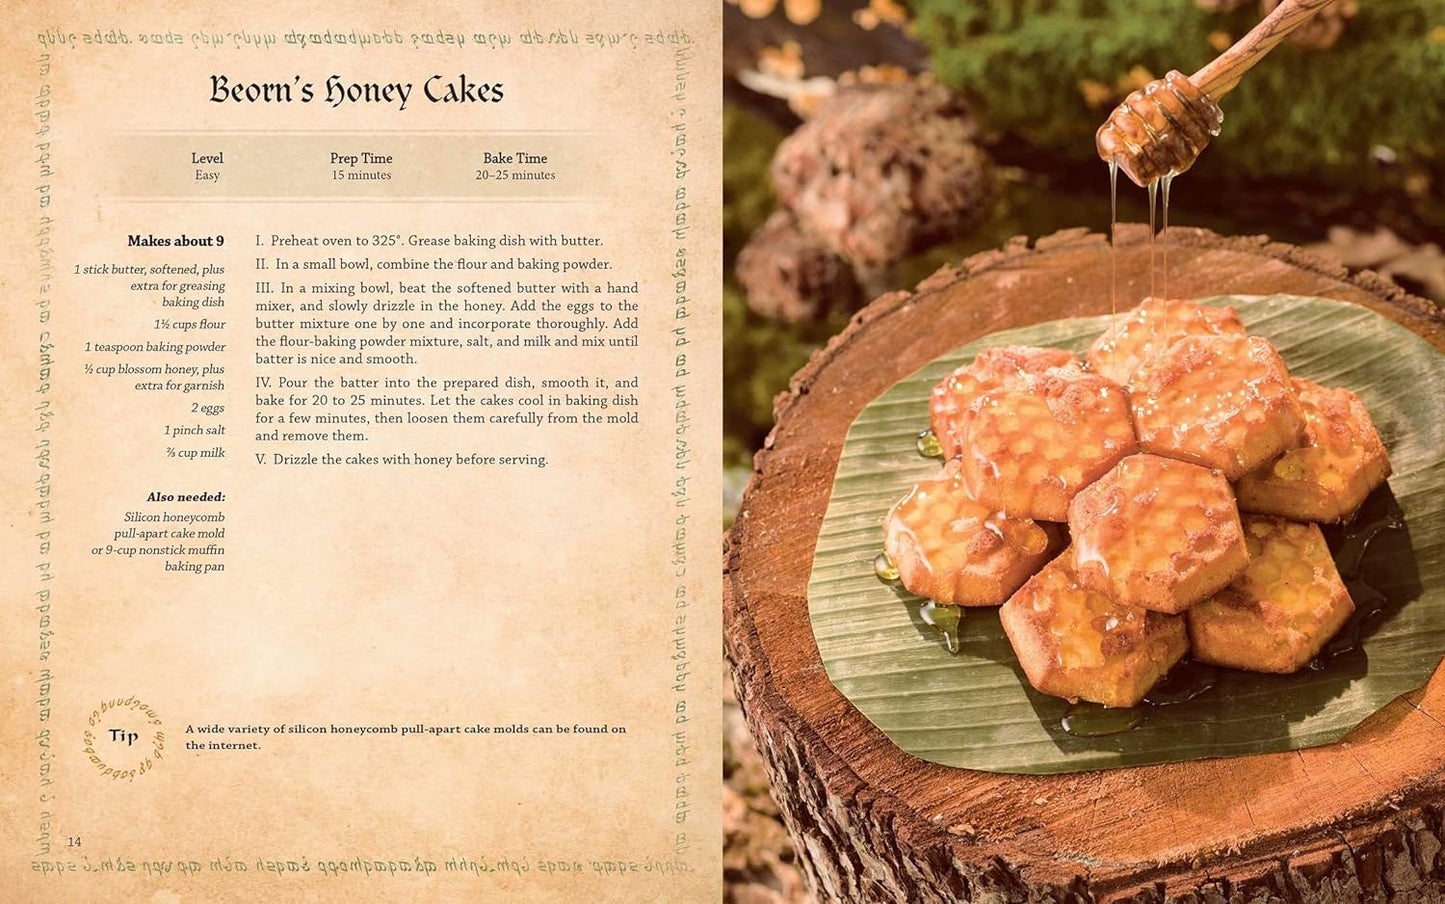 A two-page spread from the book. On the left is a parchment-colored page, with a recipe for "Beorn's Honey Cakes" in black text. On the right is an pile of honeycomb-shaped cakes on a wide green leaf, on top of a tree stump. Above the cakes is a wooden honey spoon, with golden honey dripping off it.